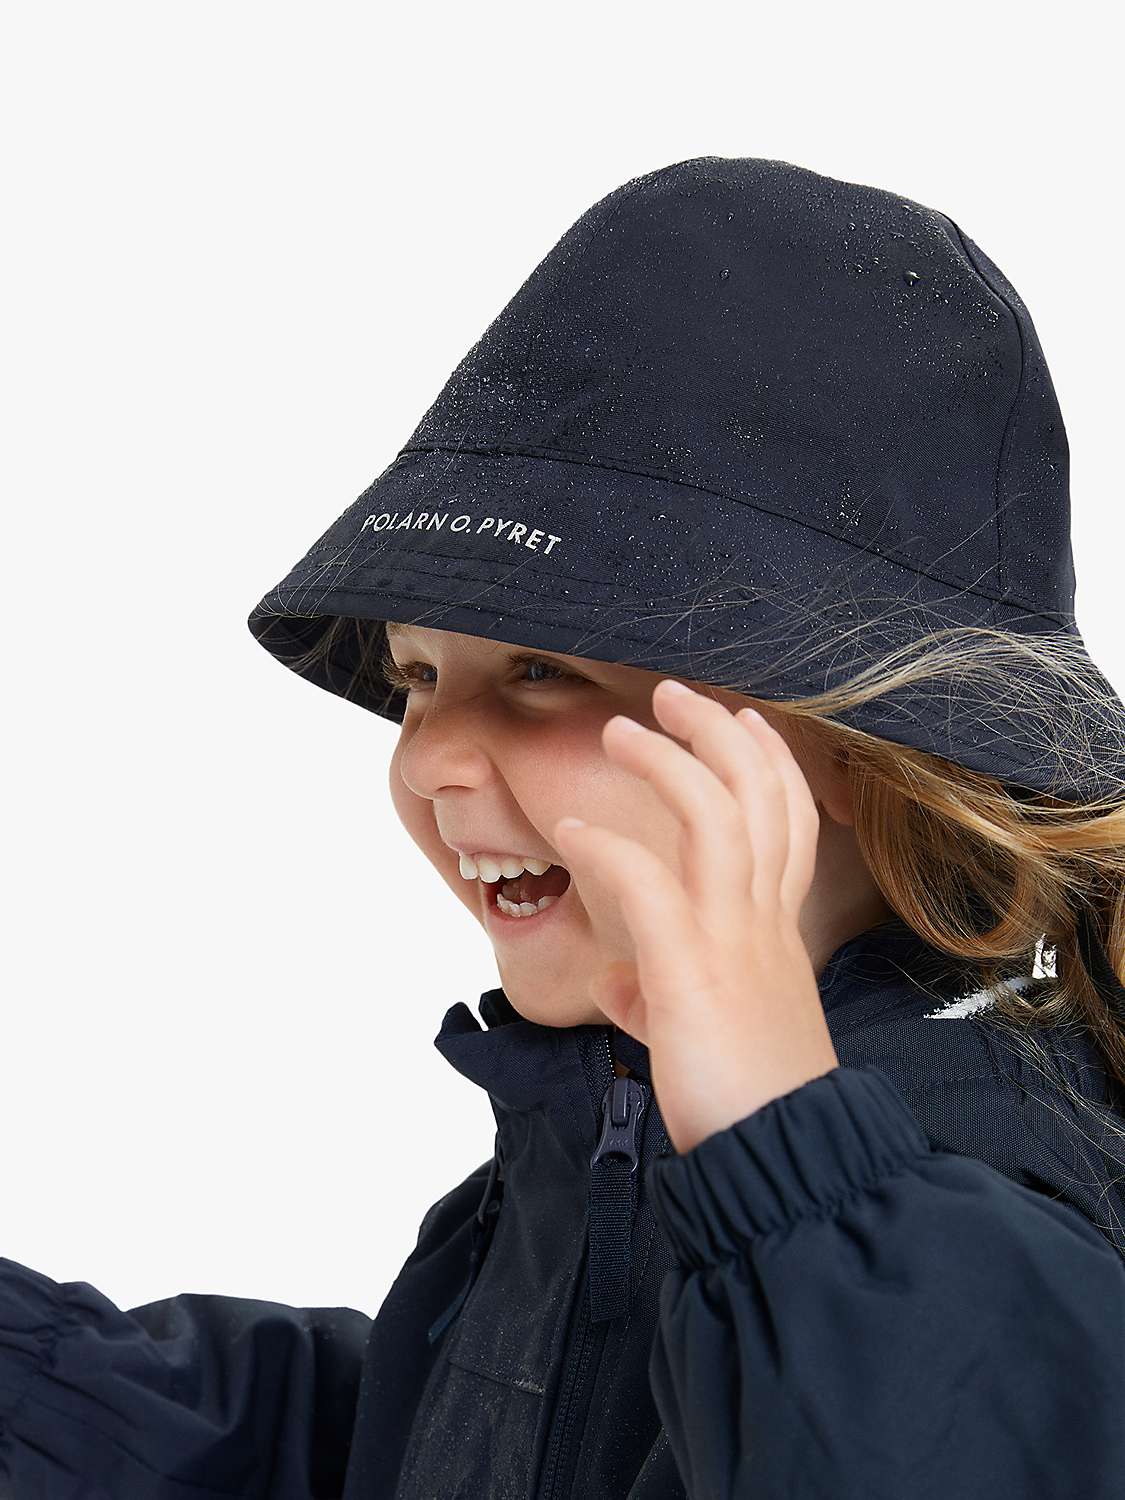 Buy Polarn O. Pyret Baby Shell Hat, Blue Online at johnlewis.com